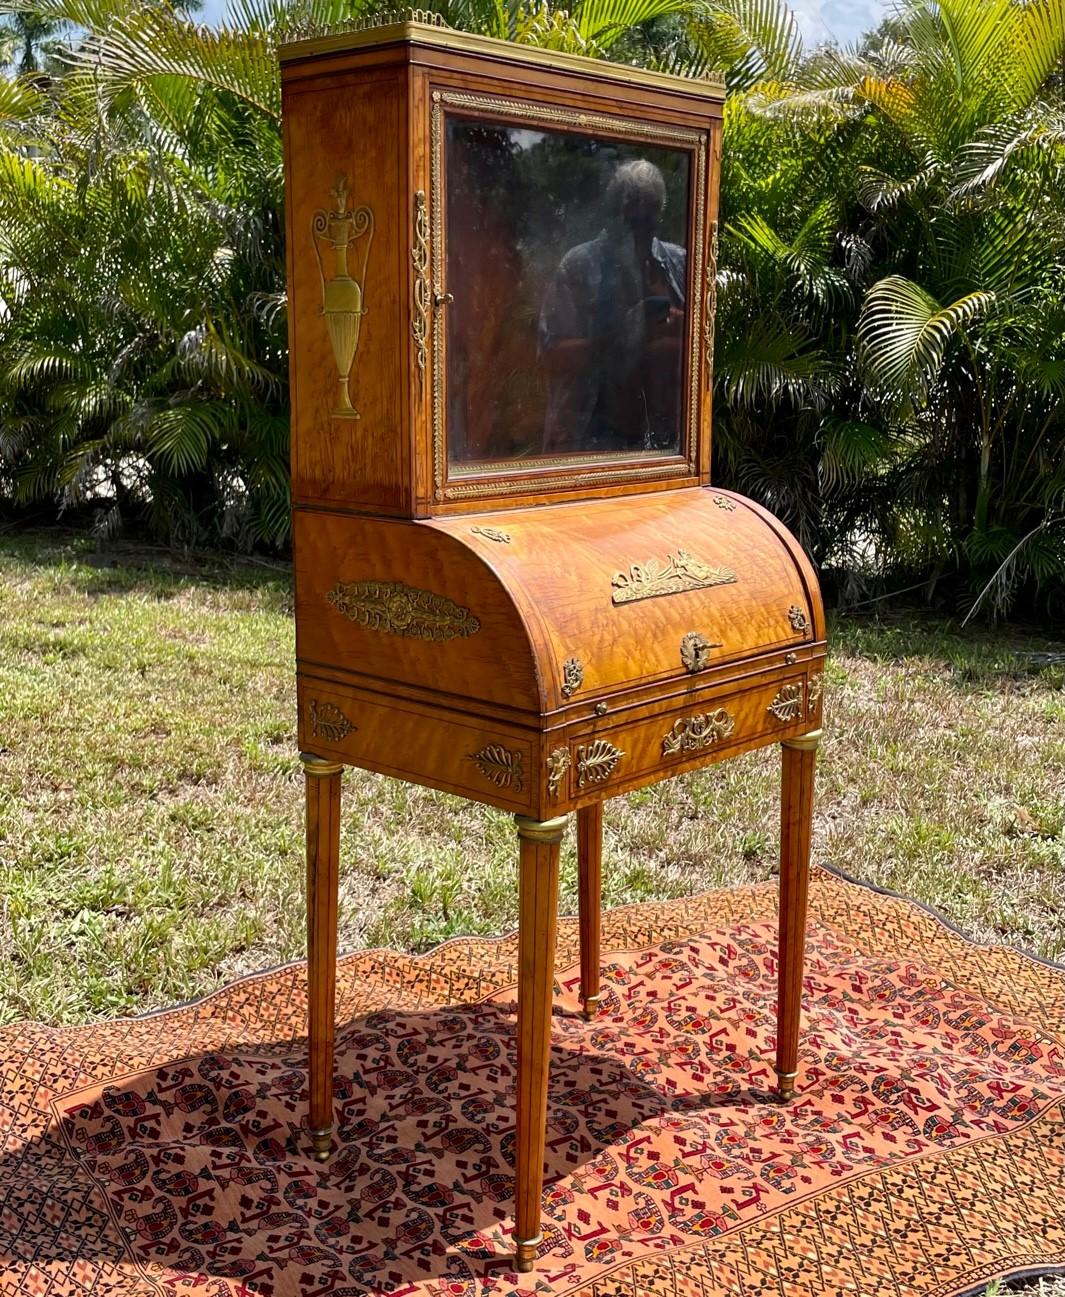 French 19th century Louis XV style Burlwood Ormolu Mounted Lady’s Desk.

Elegant French burlwood and ormolu mounted Lady’s cylinder desk. The single door cabinet is raised by slender fluted legs ending in bronze sabots. The upper glazed cupboard